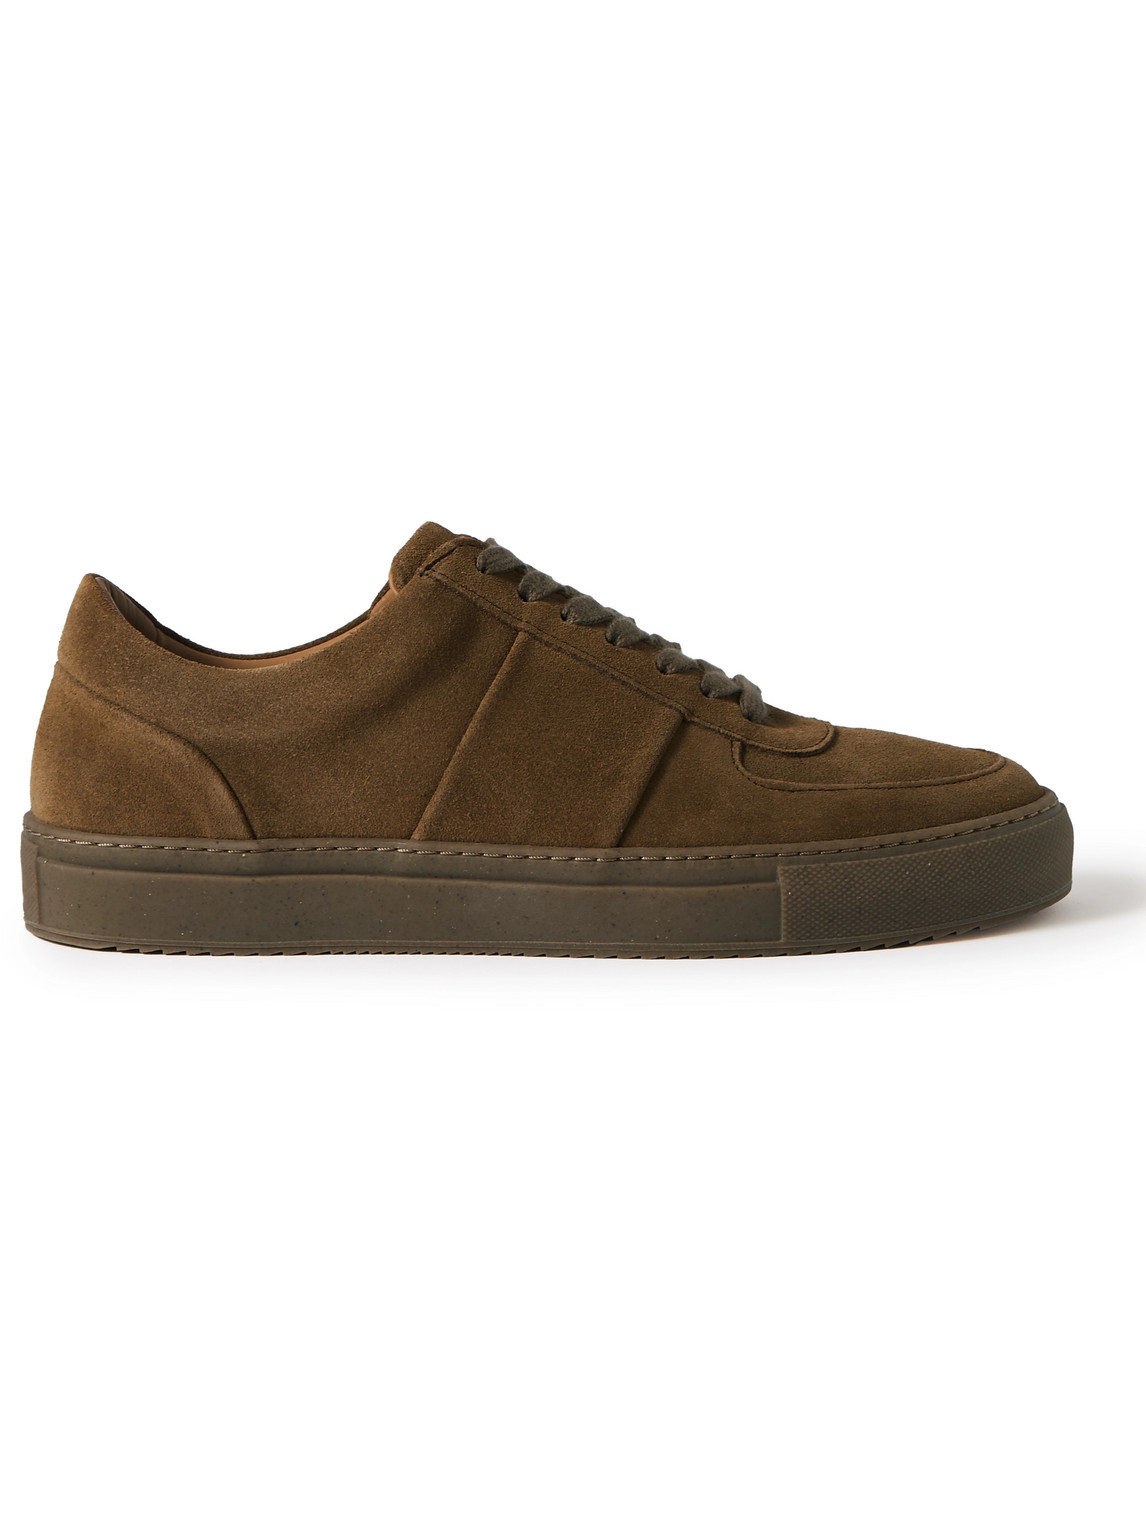 Mr P Larry Regenerated Suede By Evolo® Trainers In Brown